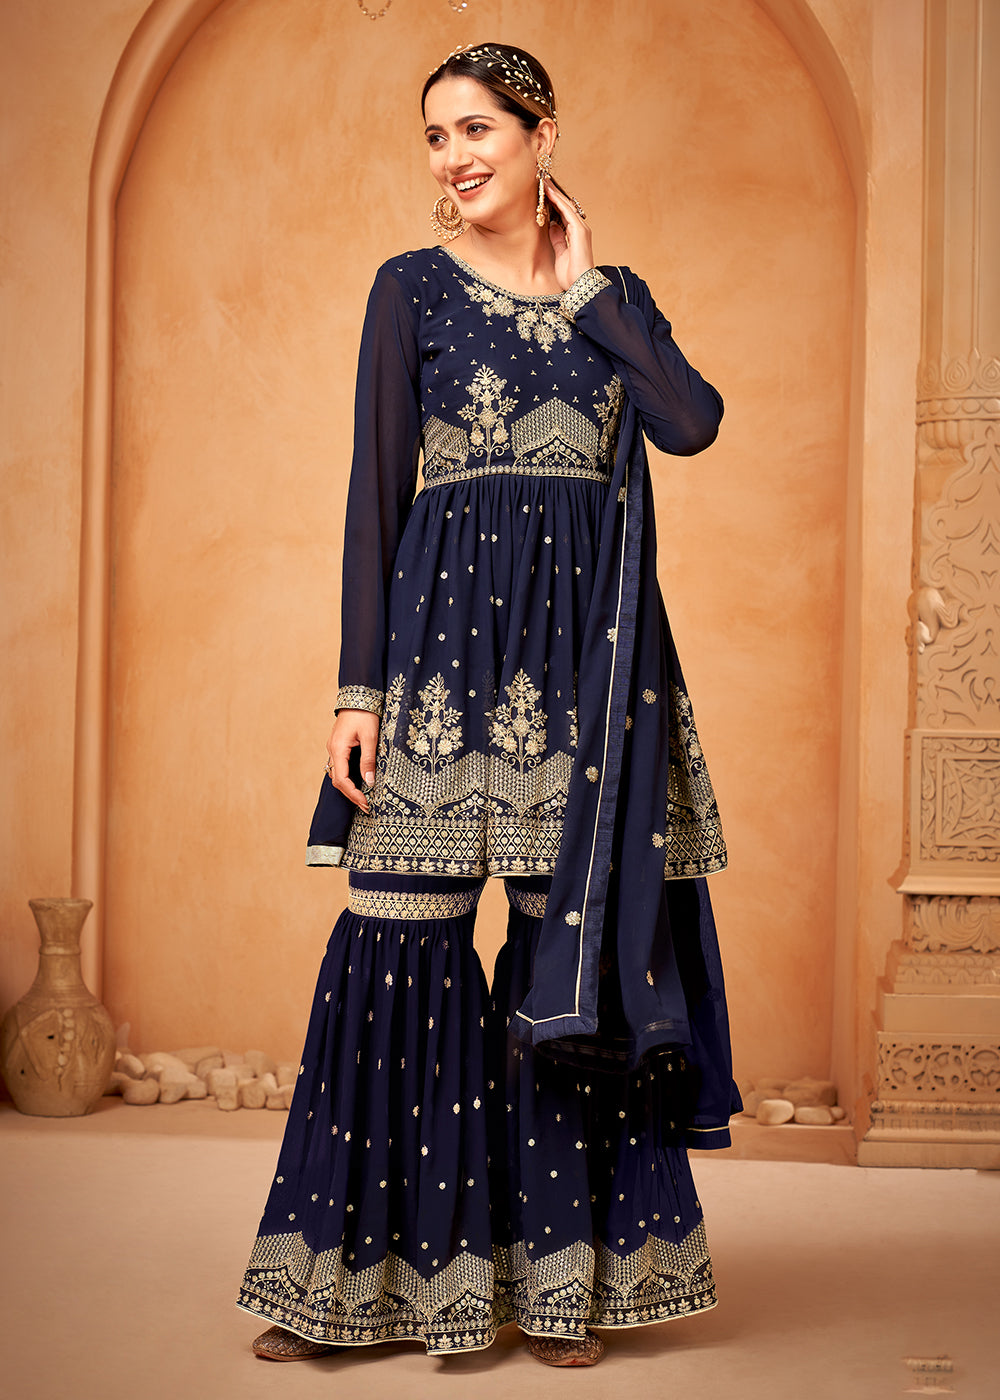 Shop Now Fantastic Navy Blue Embroidered Wedding Festive Gharara Suit Online at Empress Clothing in USA, UK, Canada, Germany & Worldwide. 